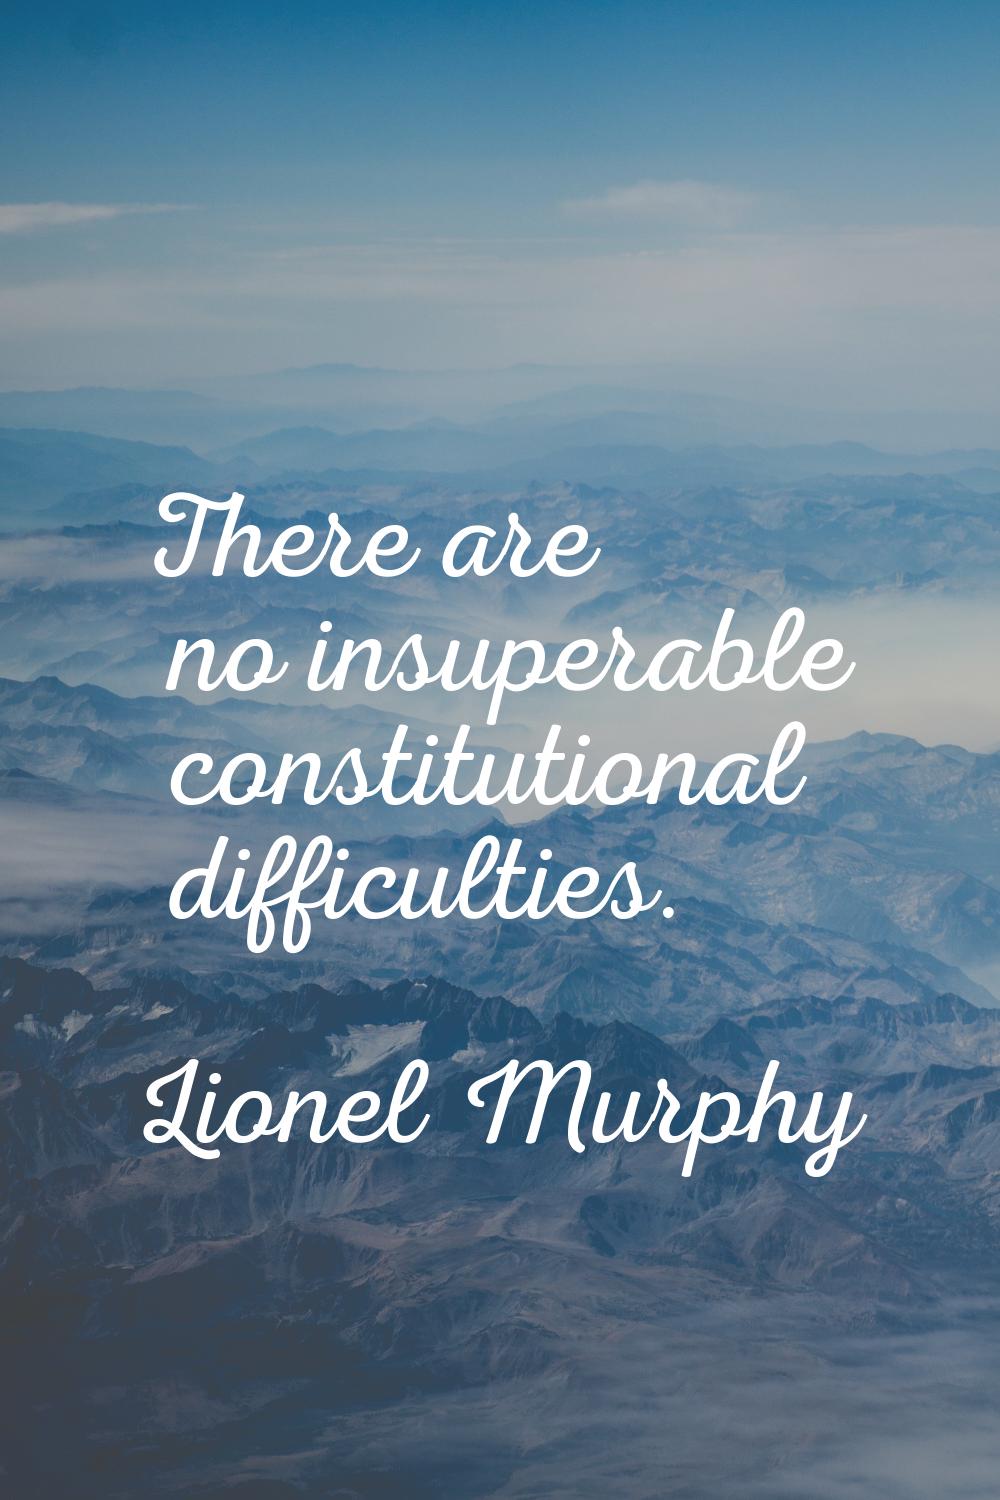 There are no insuperable constitutional difficulties.